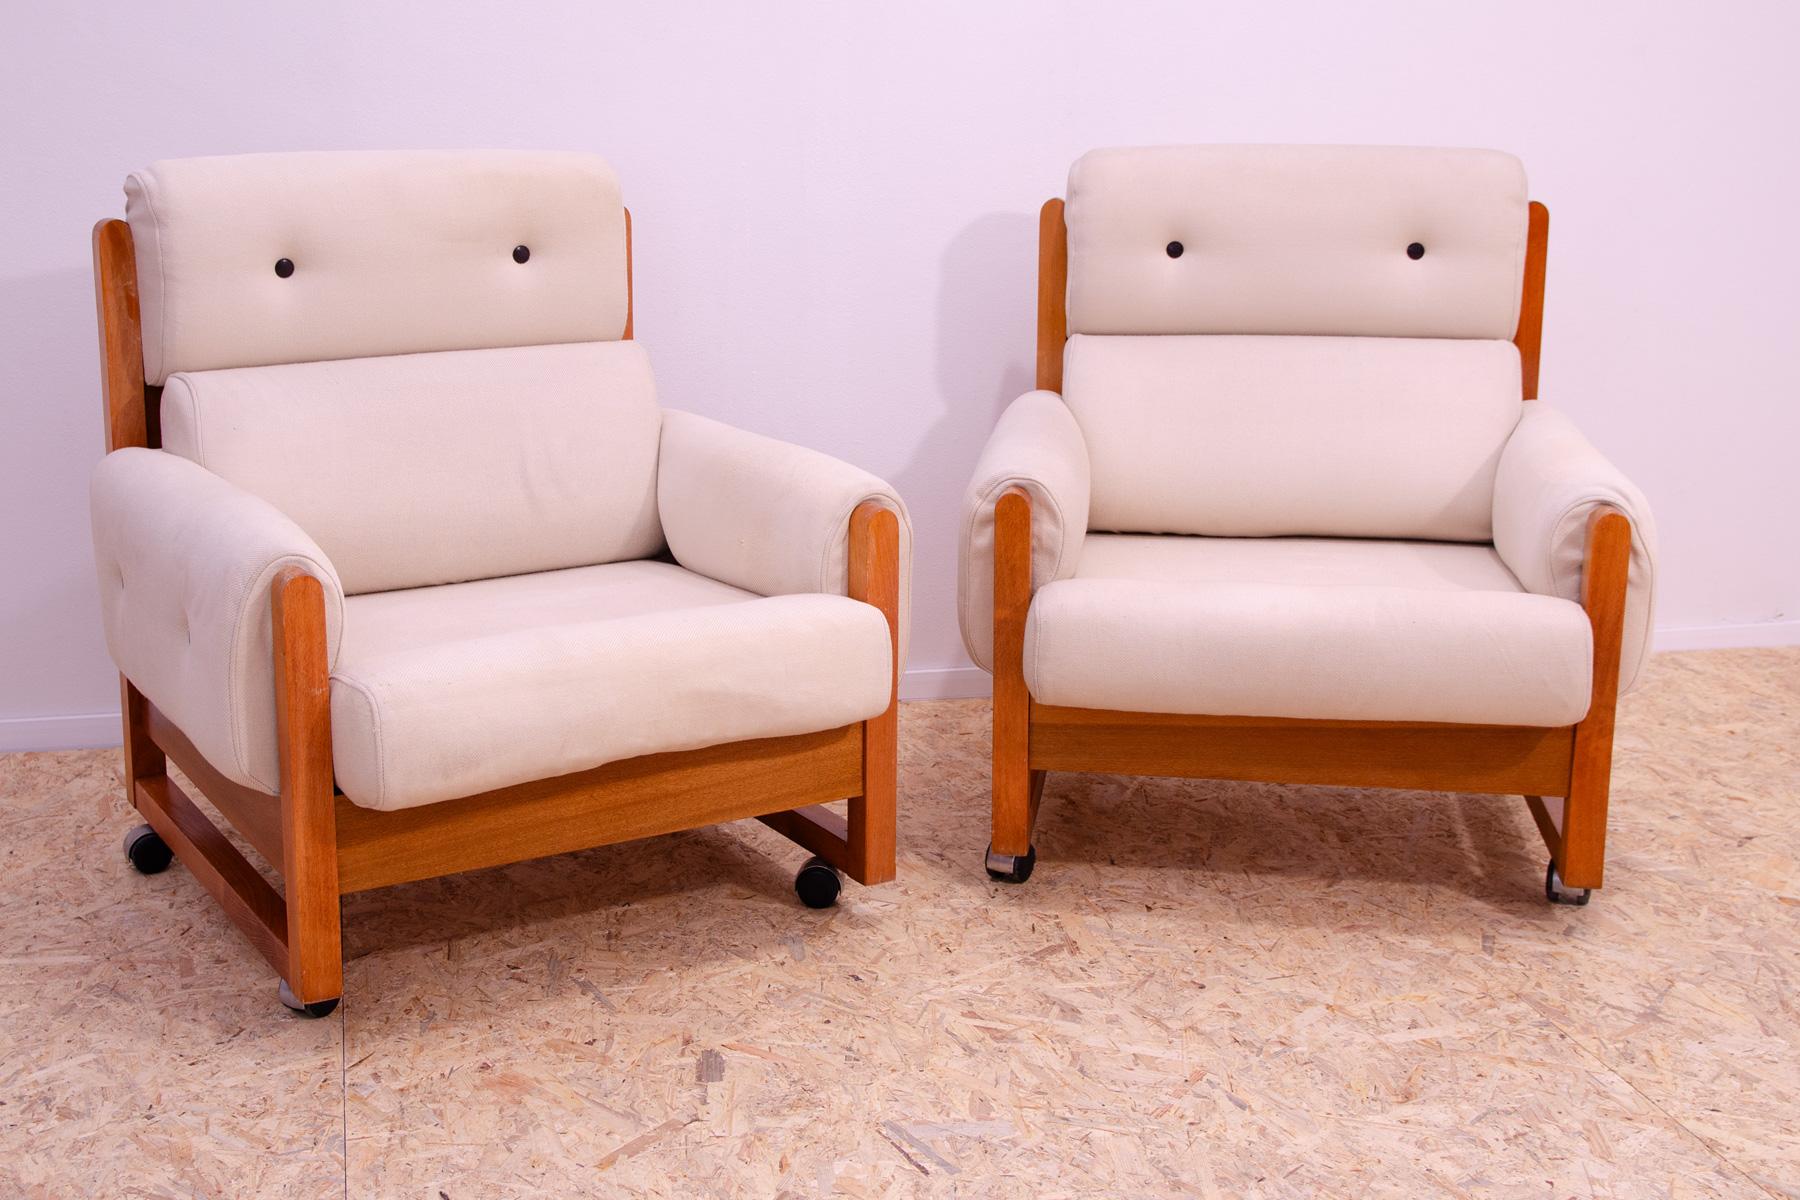 This lounge Scandinavian style armchairs were made in the 1970´s. It is upholstered with fabric. The structure is made of beech wood and the furniture stands on metal wheels. All in very good Vintage condition, shows slight signs of age and use.